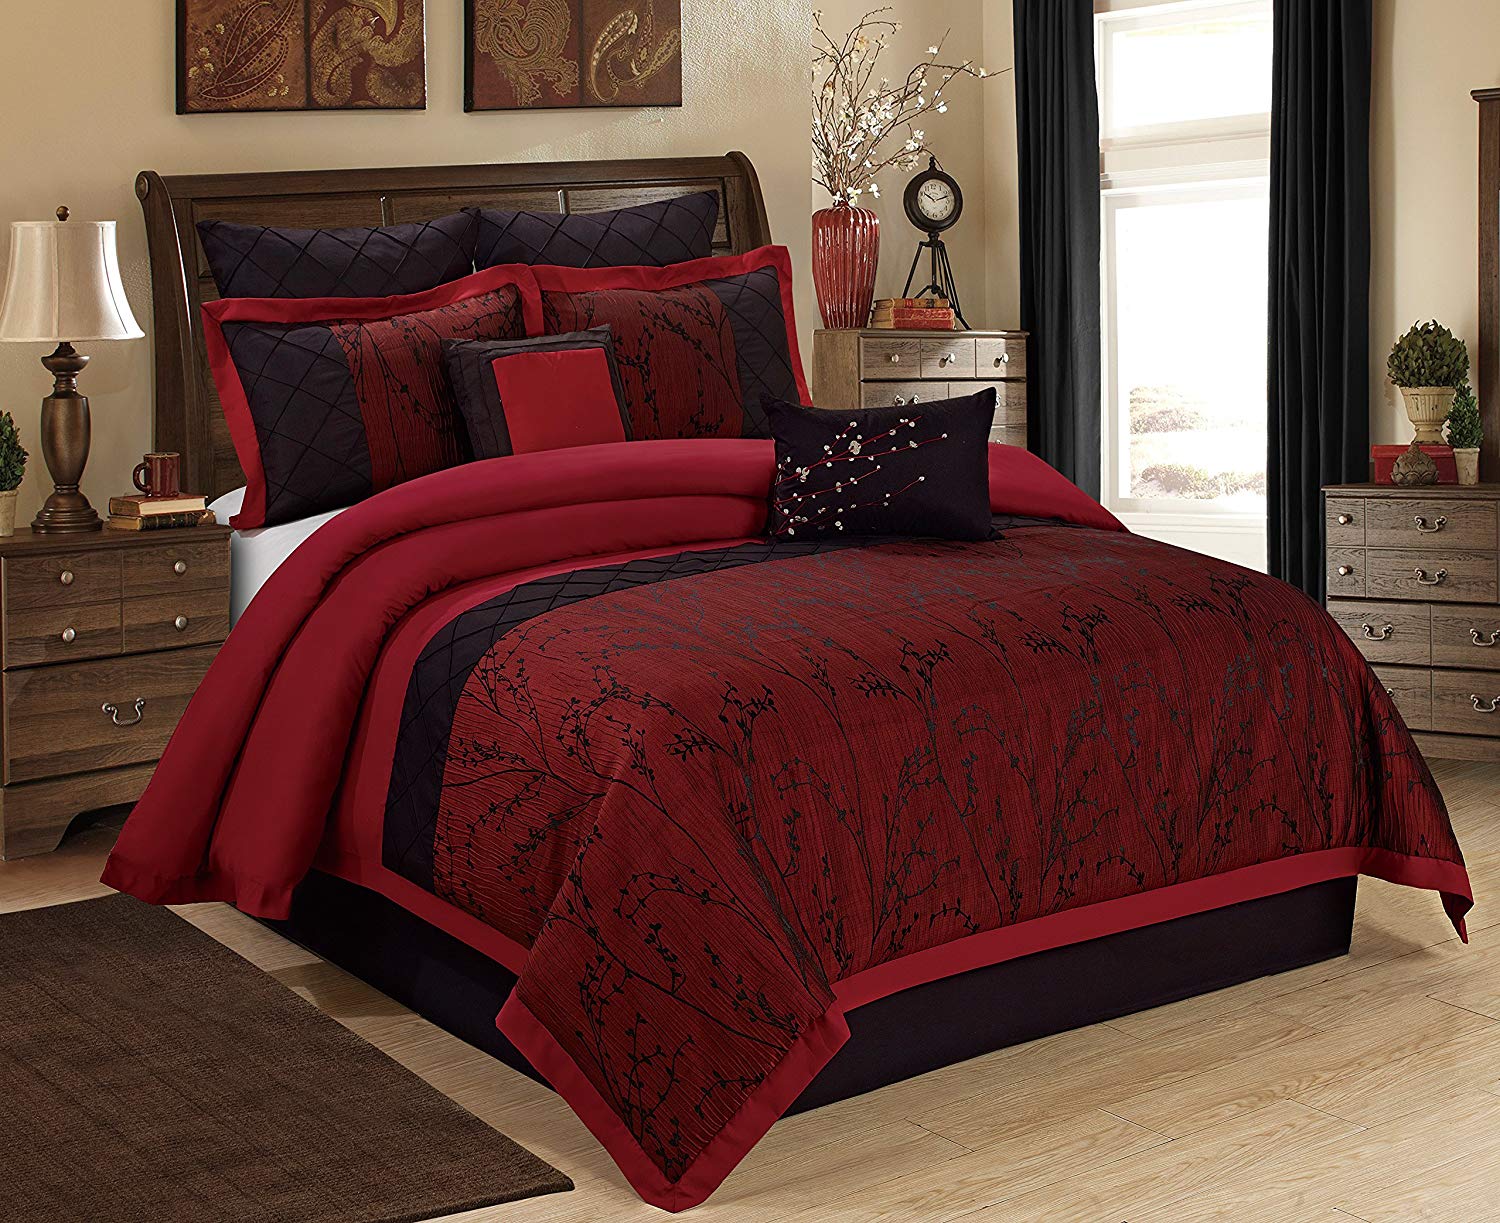 Betty Burgundy IR Bedspread 3 Piece Double Bedding Sets with 66 x 72 Pencil Pleat Curtain for Bedroom 